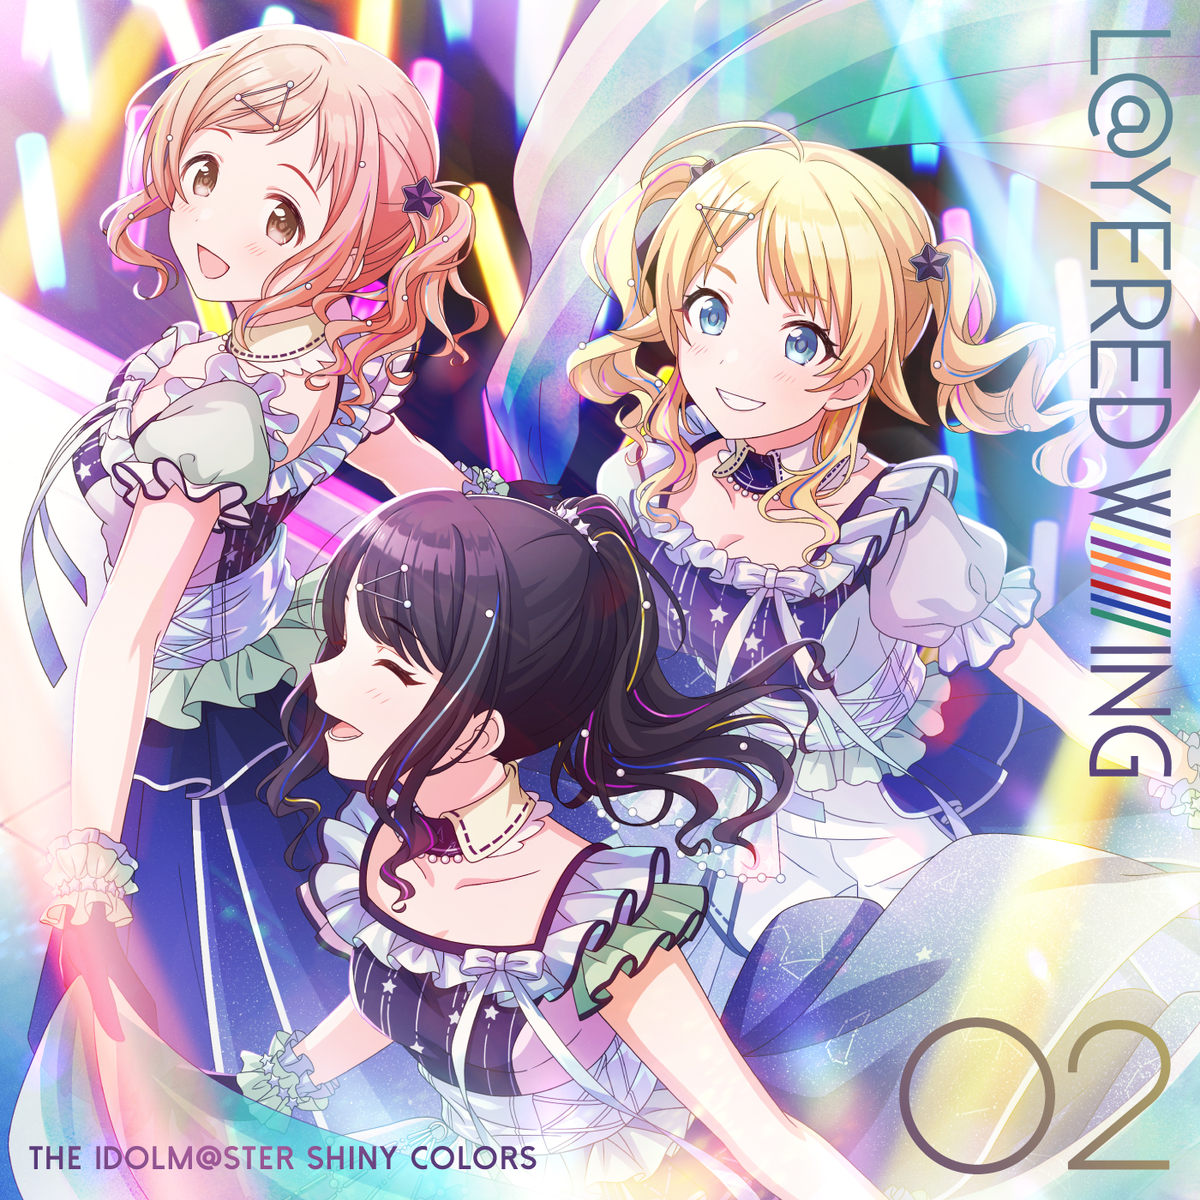 THE IDOLM@STER SHINY COLORS L@YERED WING 02 - Shinycolors Wiki